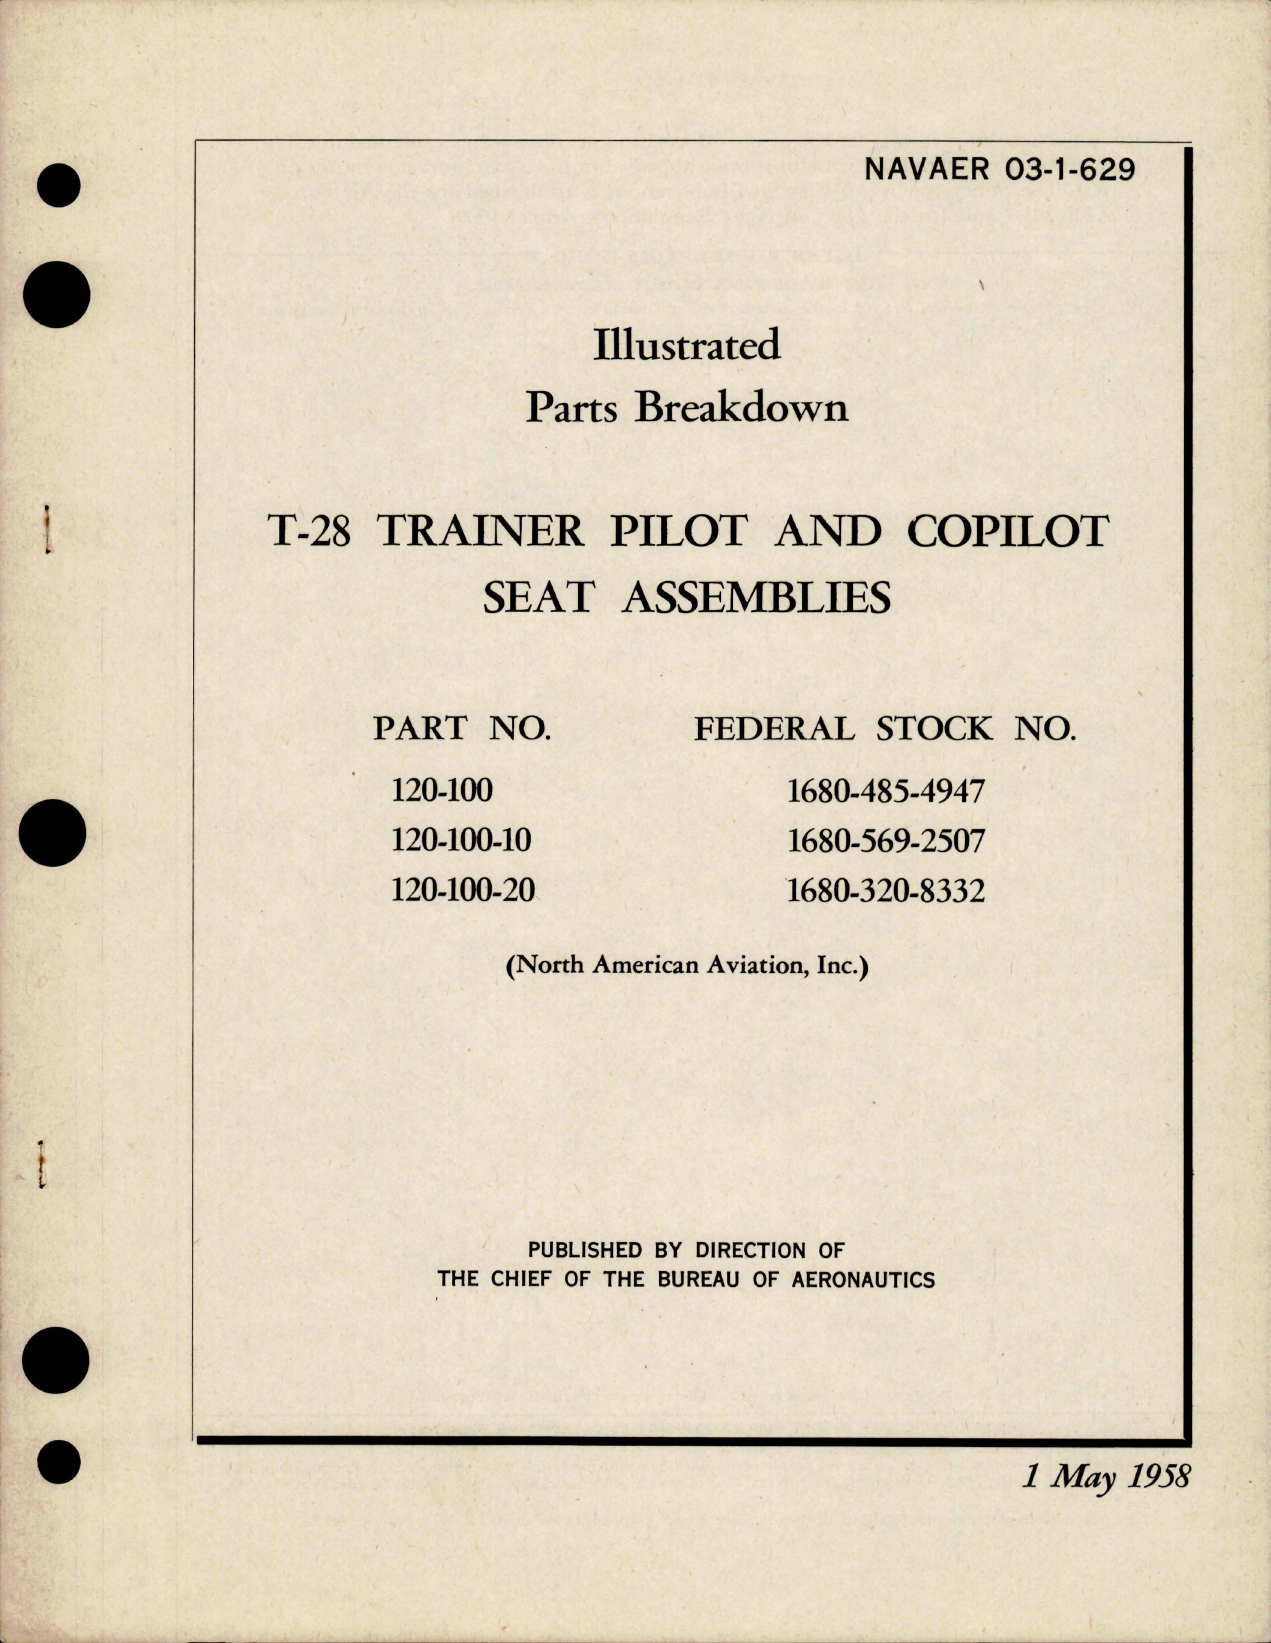 Sample page 1 from AirCorps Library document: Parts Breakdown for T-28 Trainer Pilot and Copilot Seat Assemblies